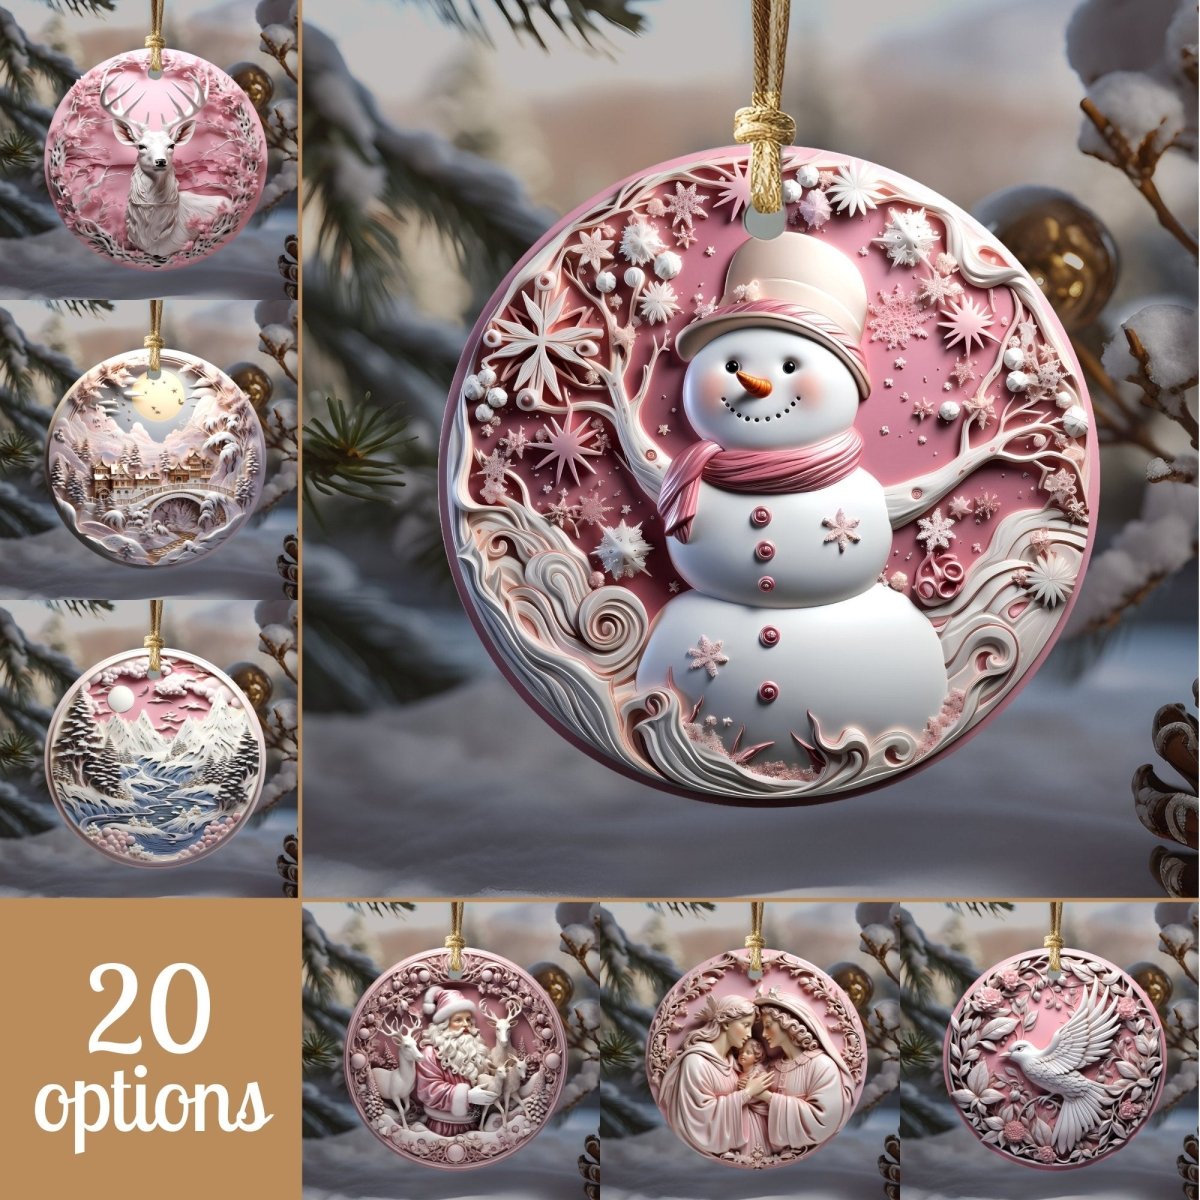 Stylish Pink Ornaments Set of 20 Round Ceramic Ornaments Pink 3D Style Print on Ornament (no Relief) Festive Christmas Tree Decoration - Everything Pixel